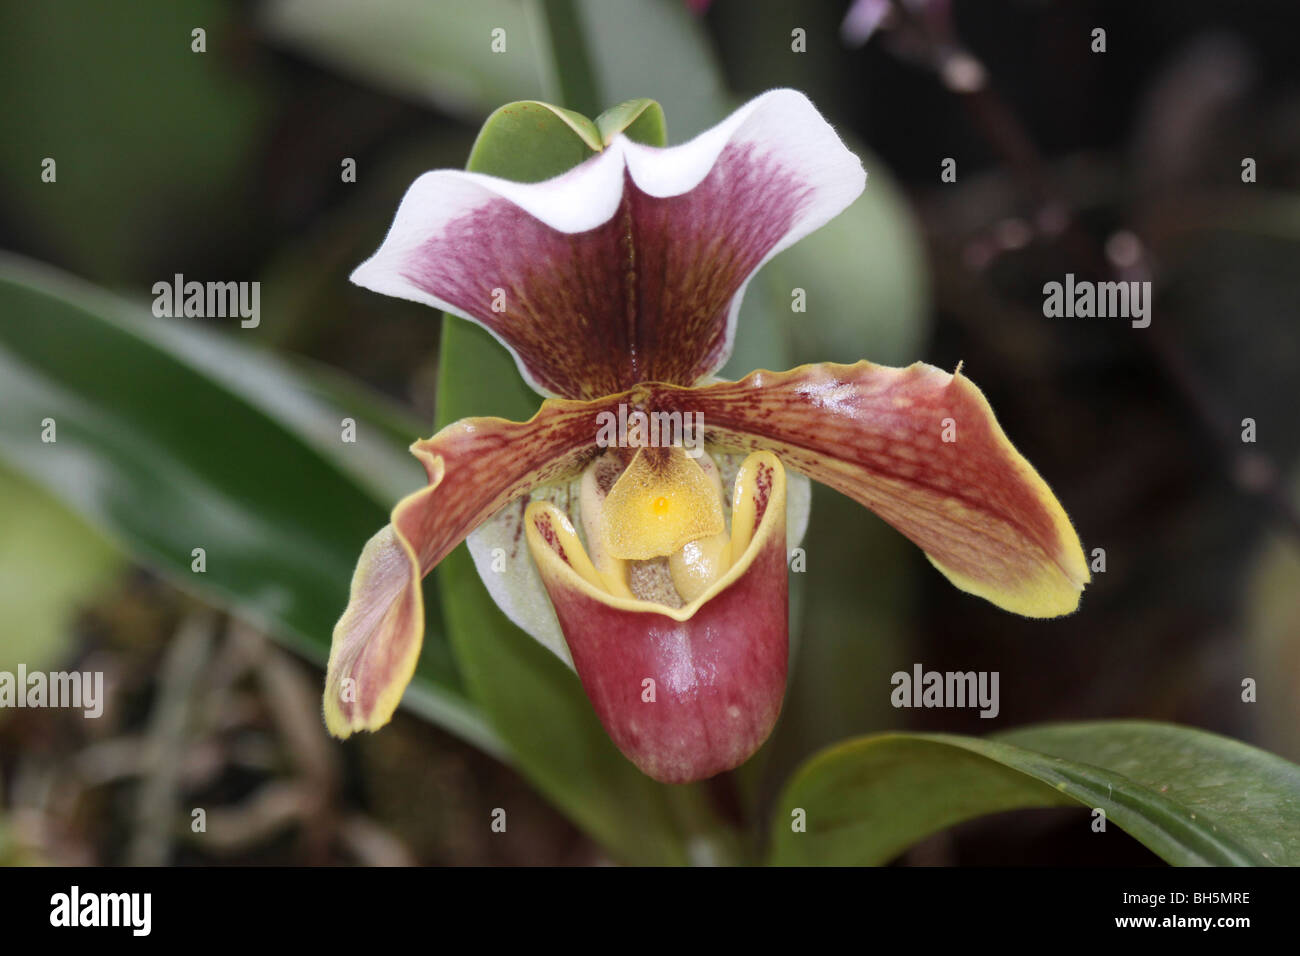 Slipper Orchid Paphiopedilum species Taken At Chester Zoo, England, UK Stock Photo